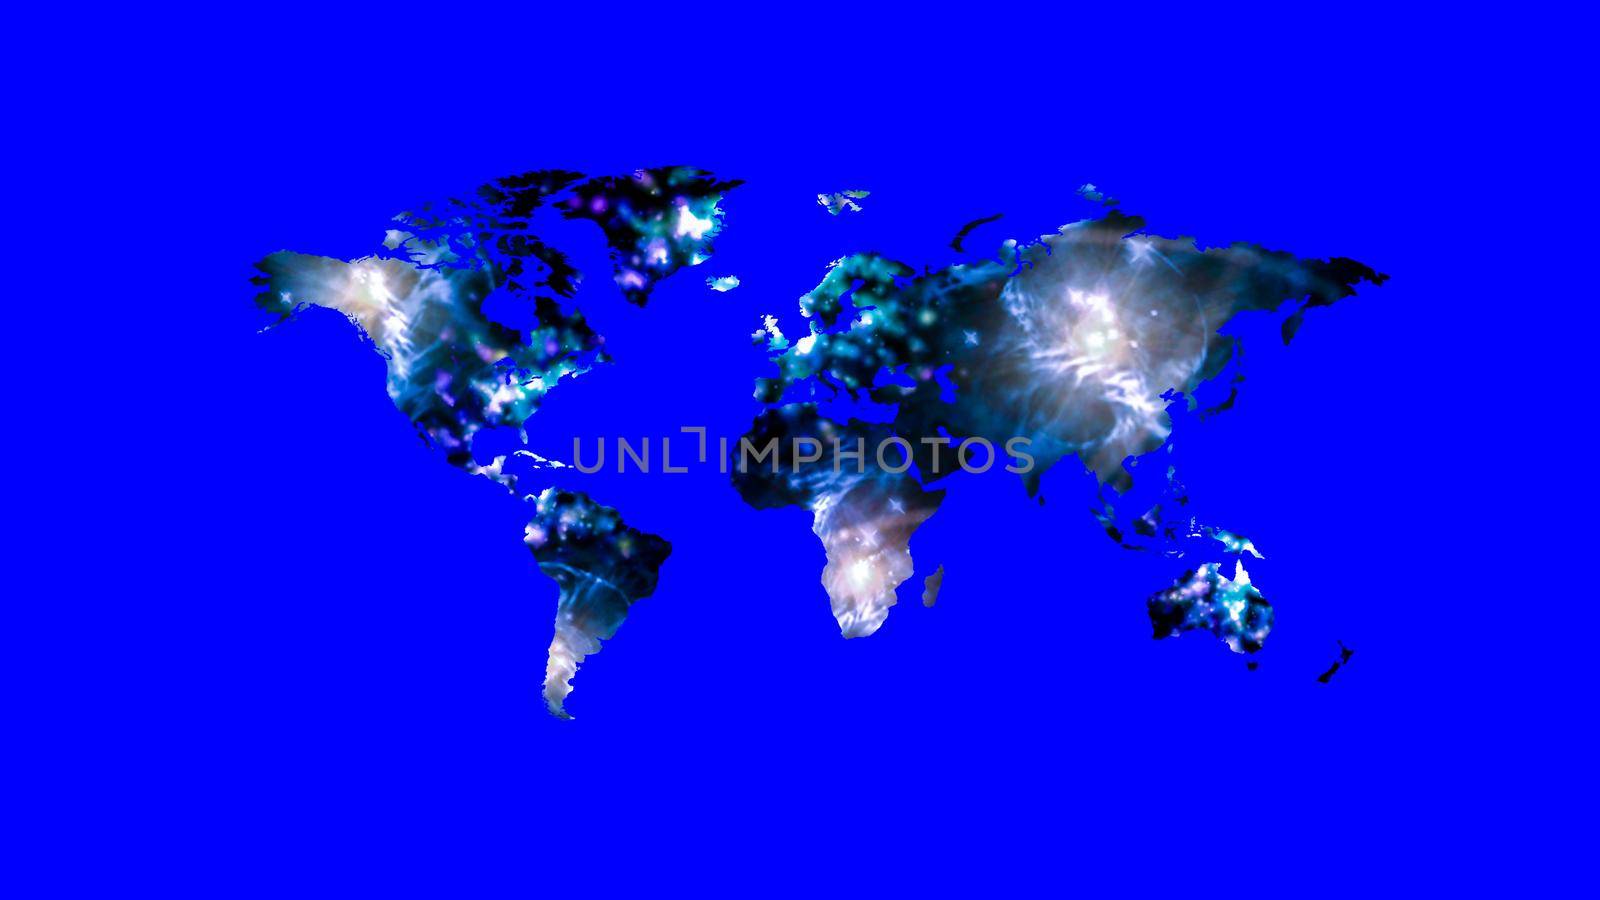 Abstract world map with glowing lines by imagesbykenny